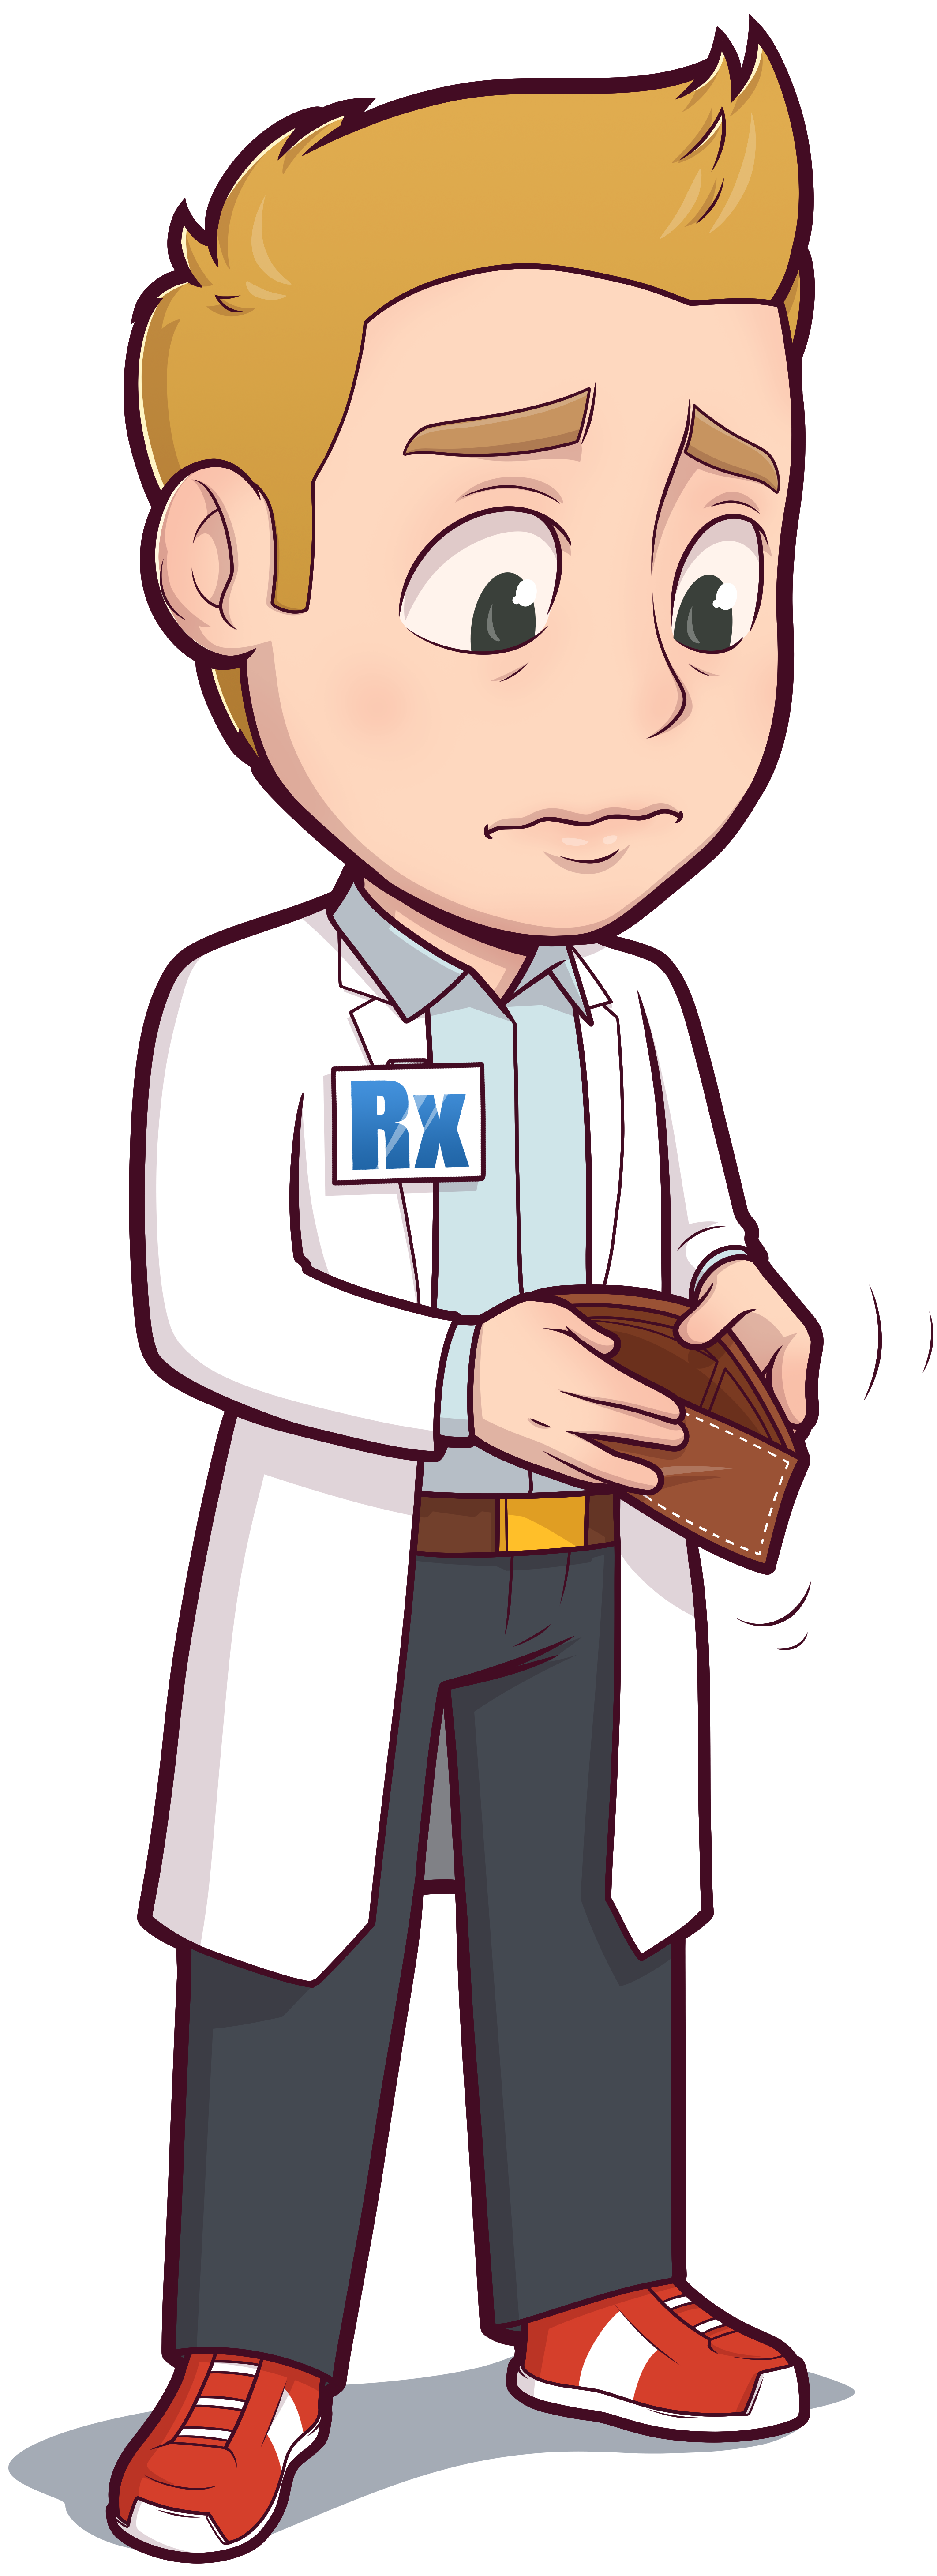 Illustrated character of Fred the Pharmacist holding open an empty wallet. He is a young white male.